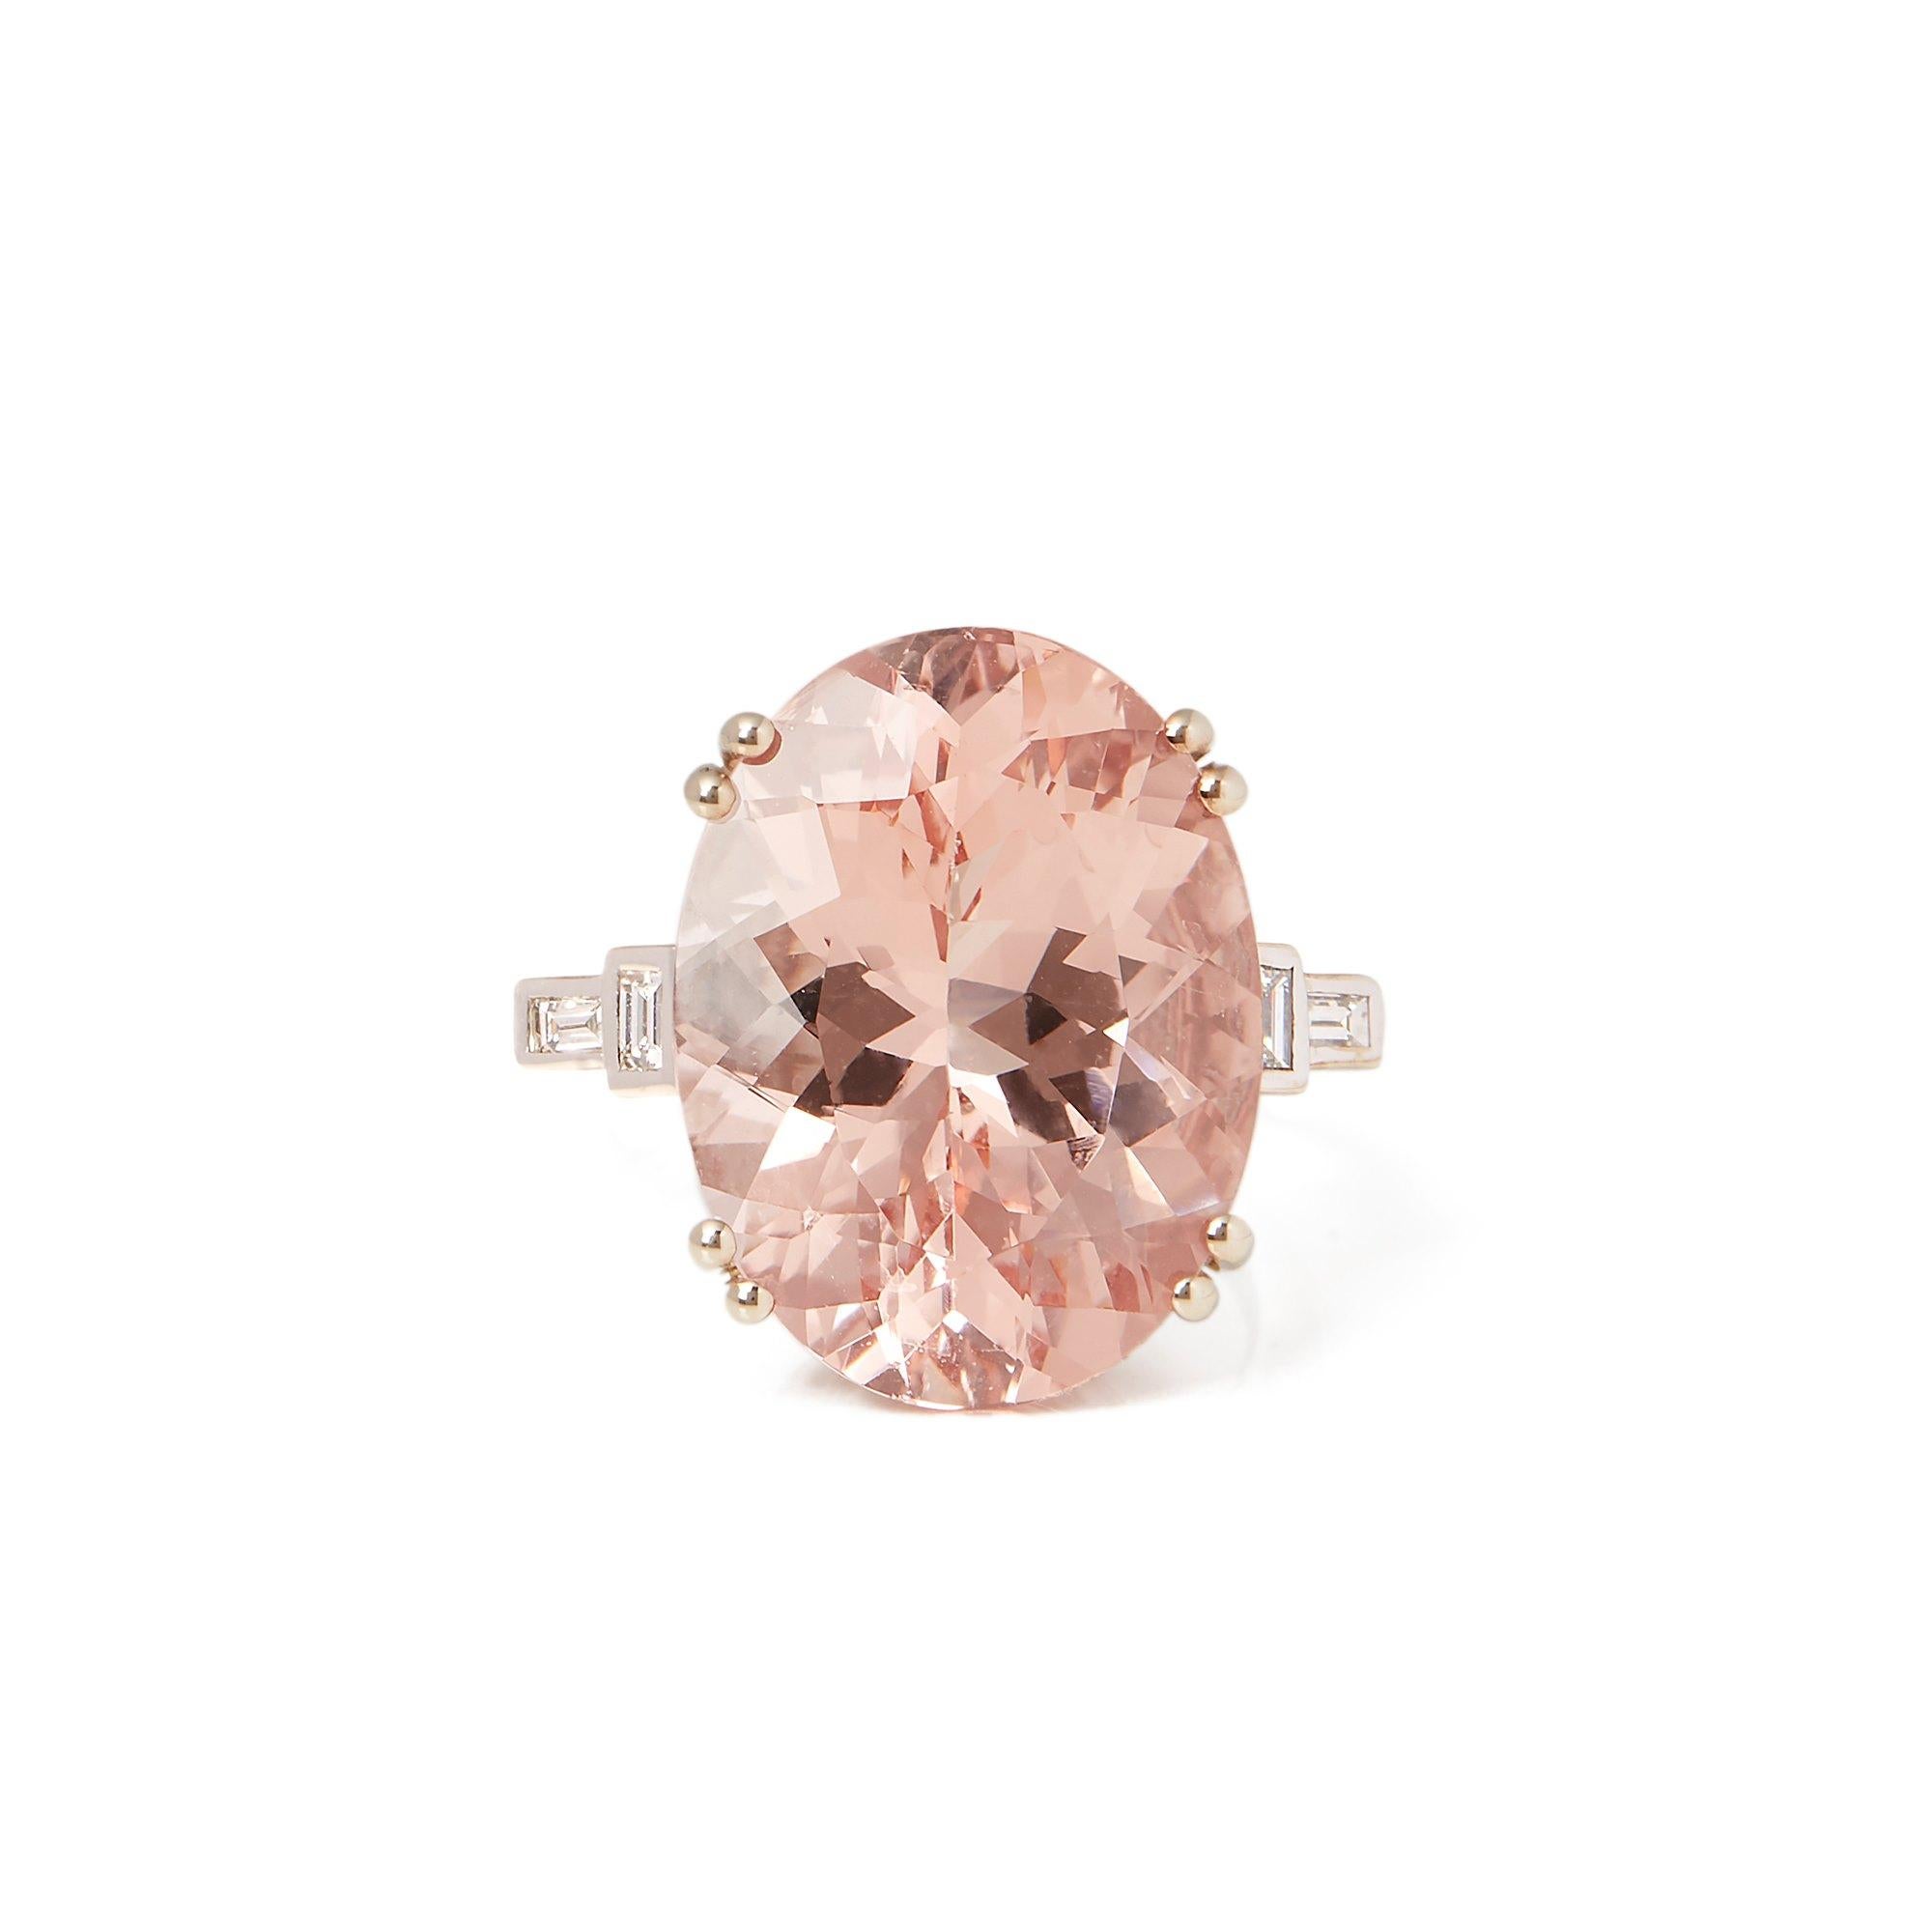 This ring designed by David Jerome is from his private collection and features one oval cut morganite totalling 18.49cts sourced in Brazil. Set with round brilliant cut Diamonds totalling 0.30cts mounted in an 18k white gold setting. UK finger size